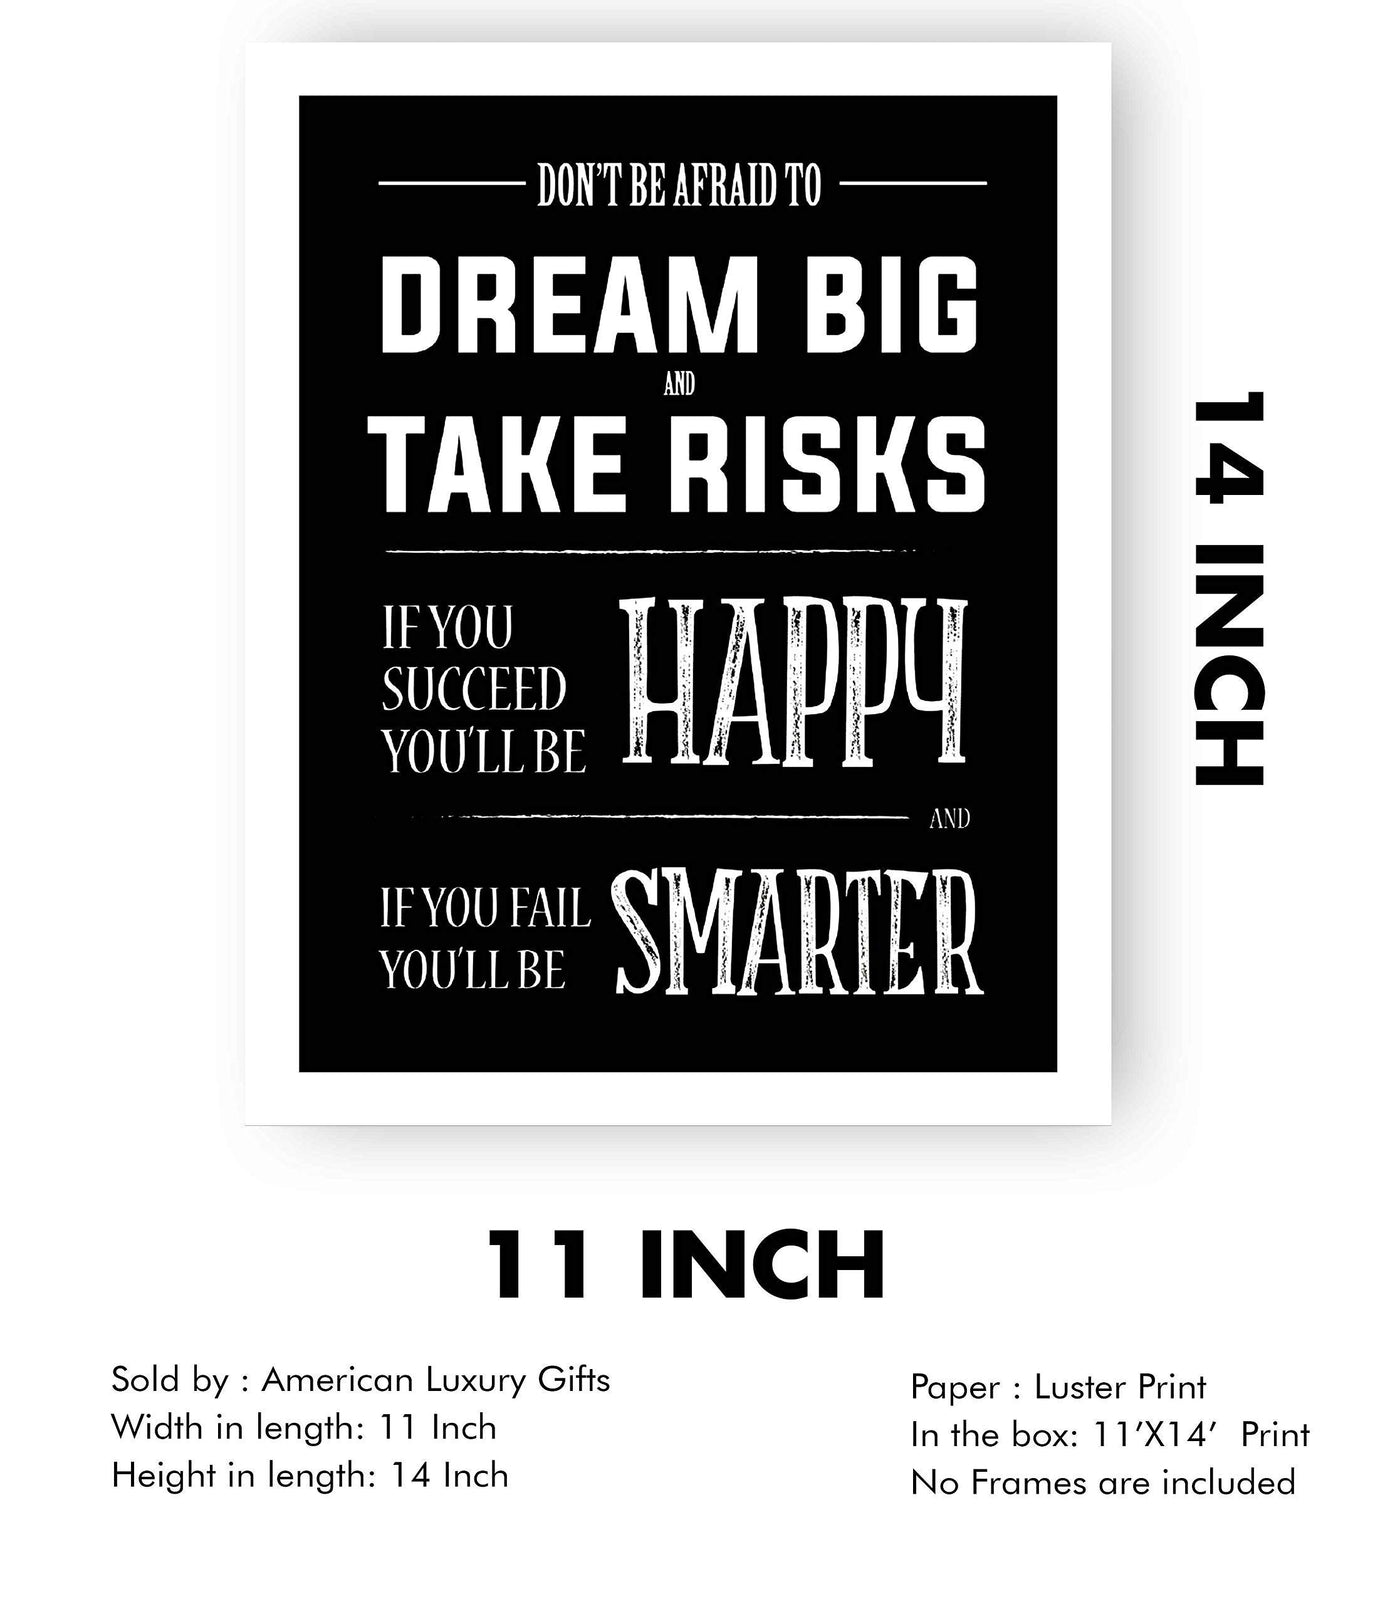 Don't Be Afraid to Dream Big & Take Risks Inspirational Quotes Wall Art- 11 x 14" Motivational Poster Print-Ready to Frame. Home-Office-Studio-Classroom-Dorm Decor. Perfect Gift of Motivation!